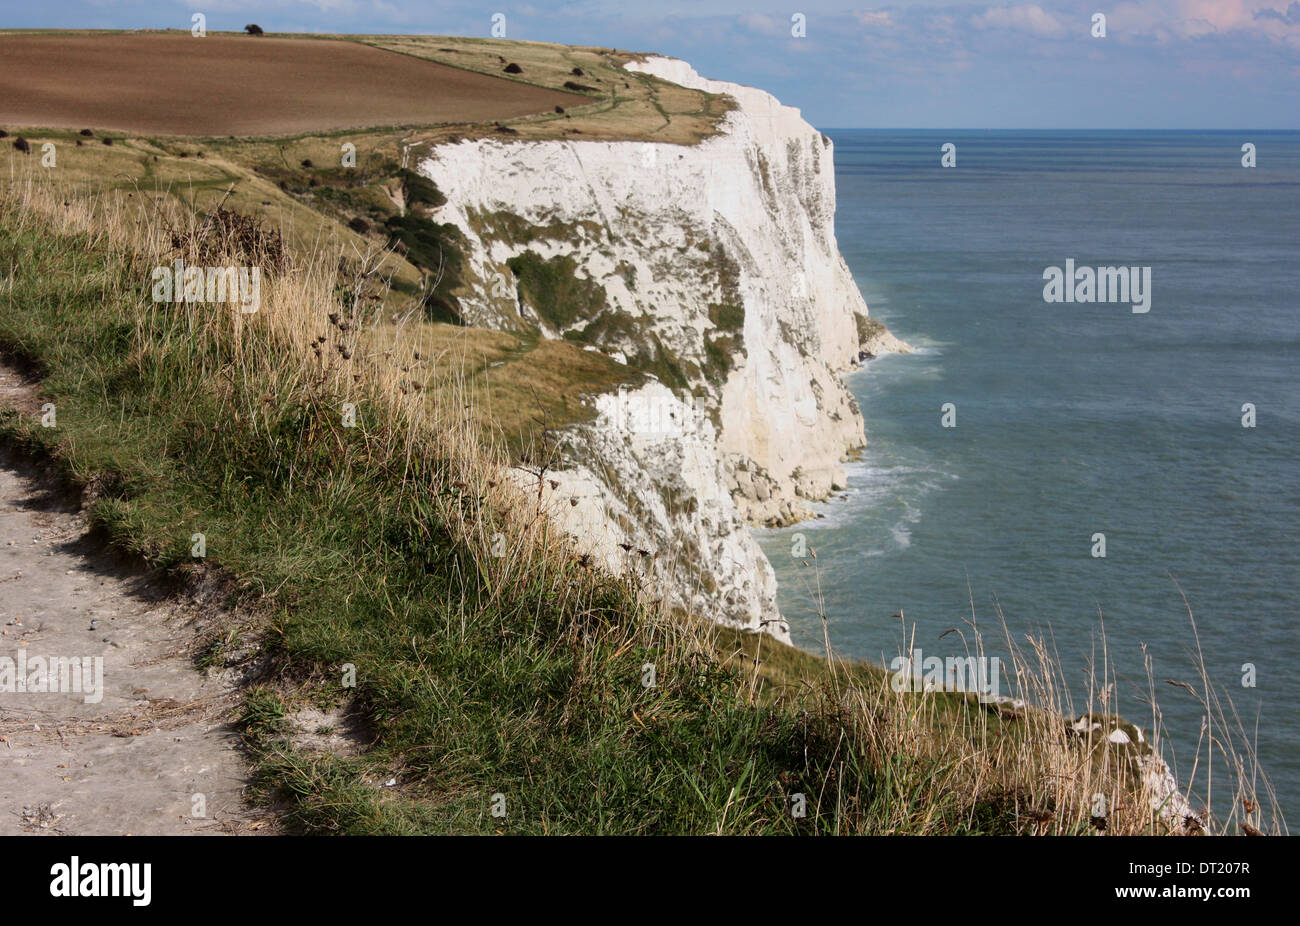 a landscape scene looking over the edge at the white cliffs of Dover Stock Photo